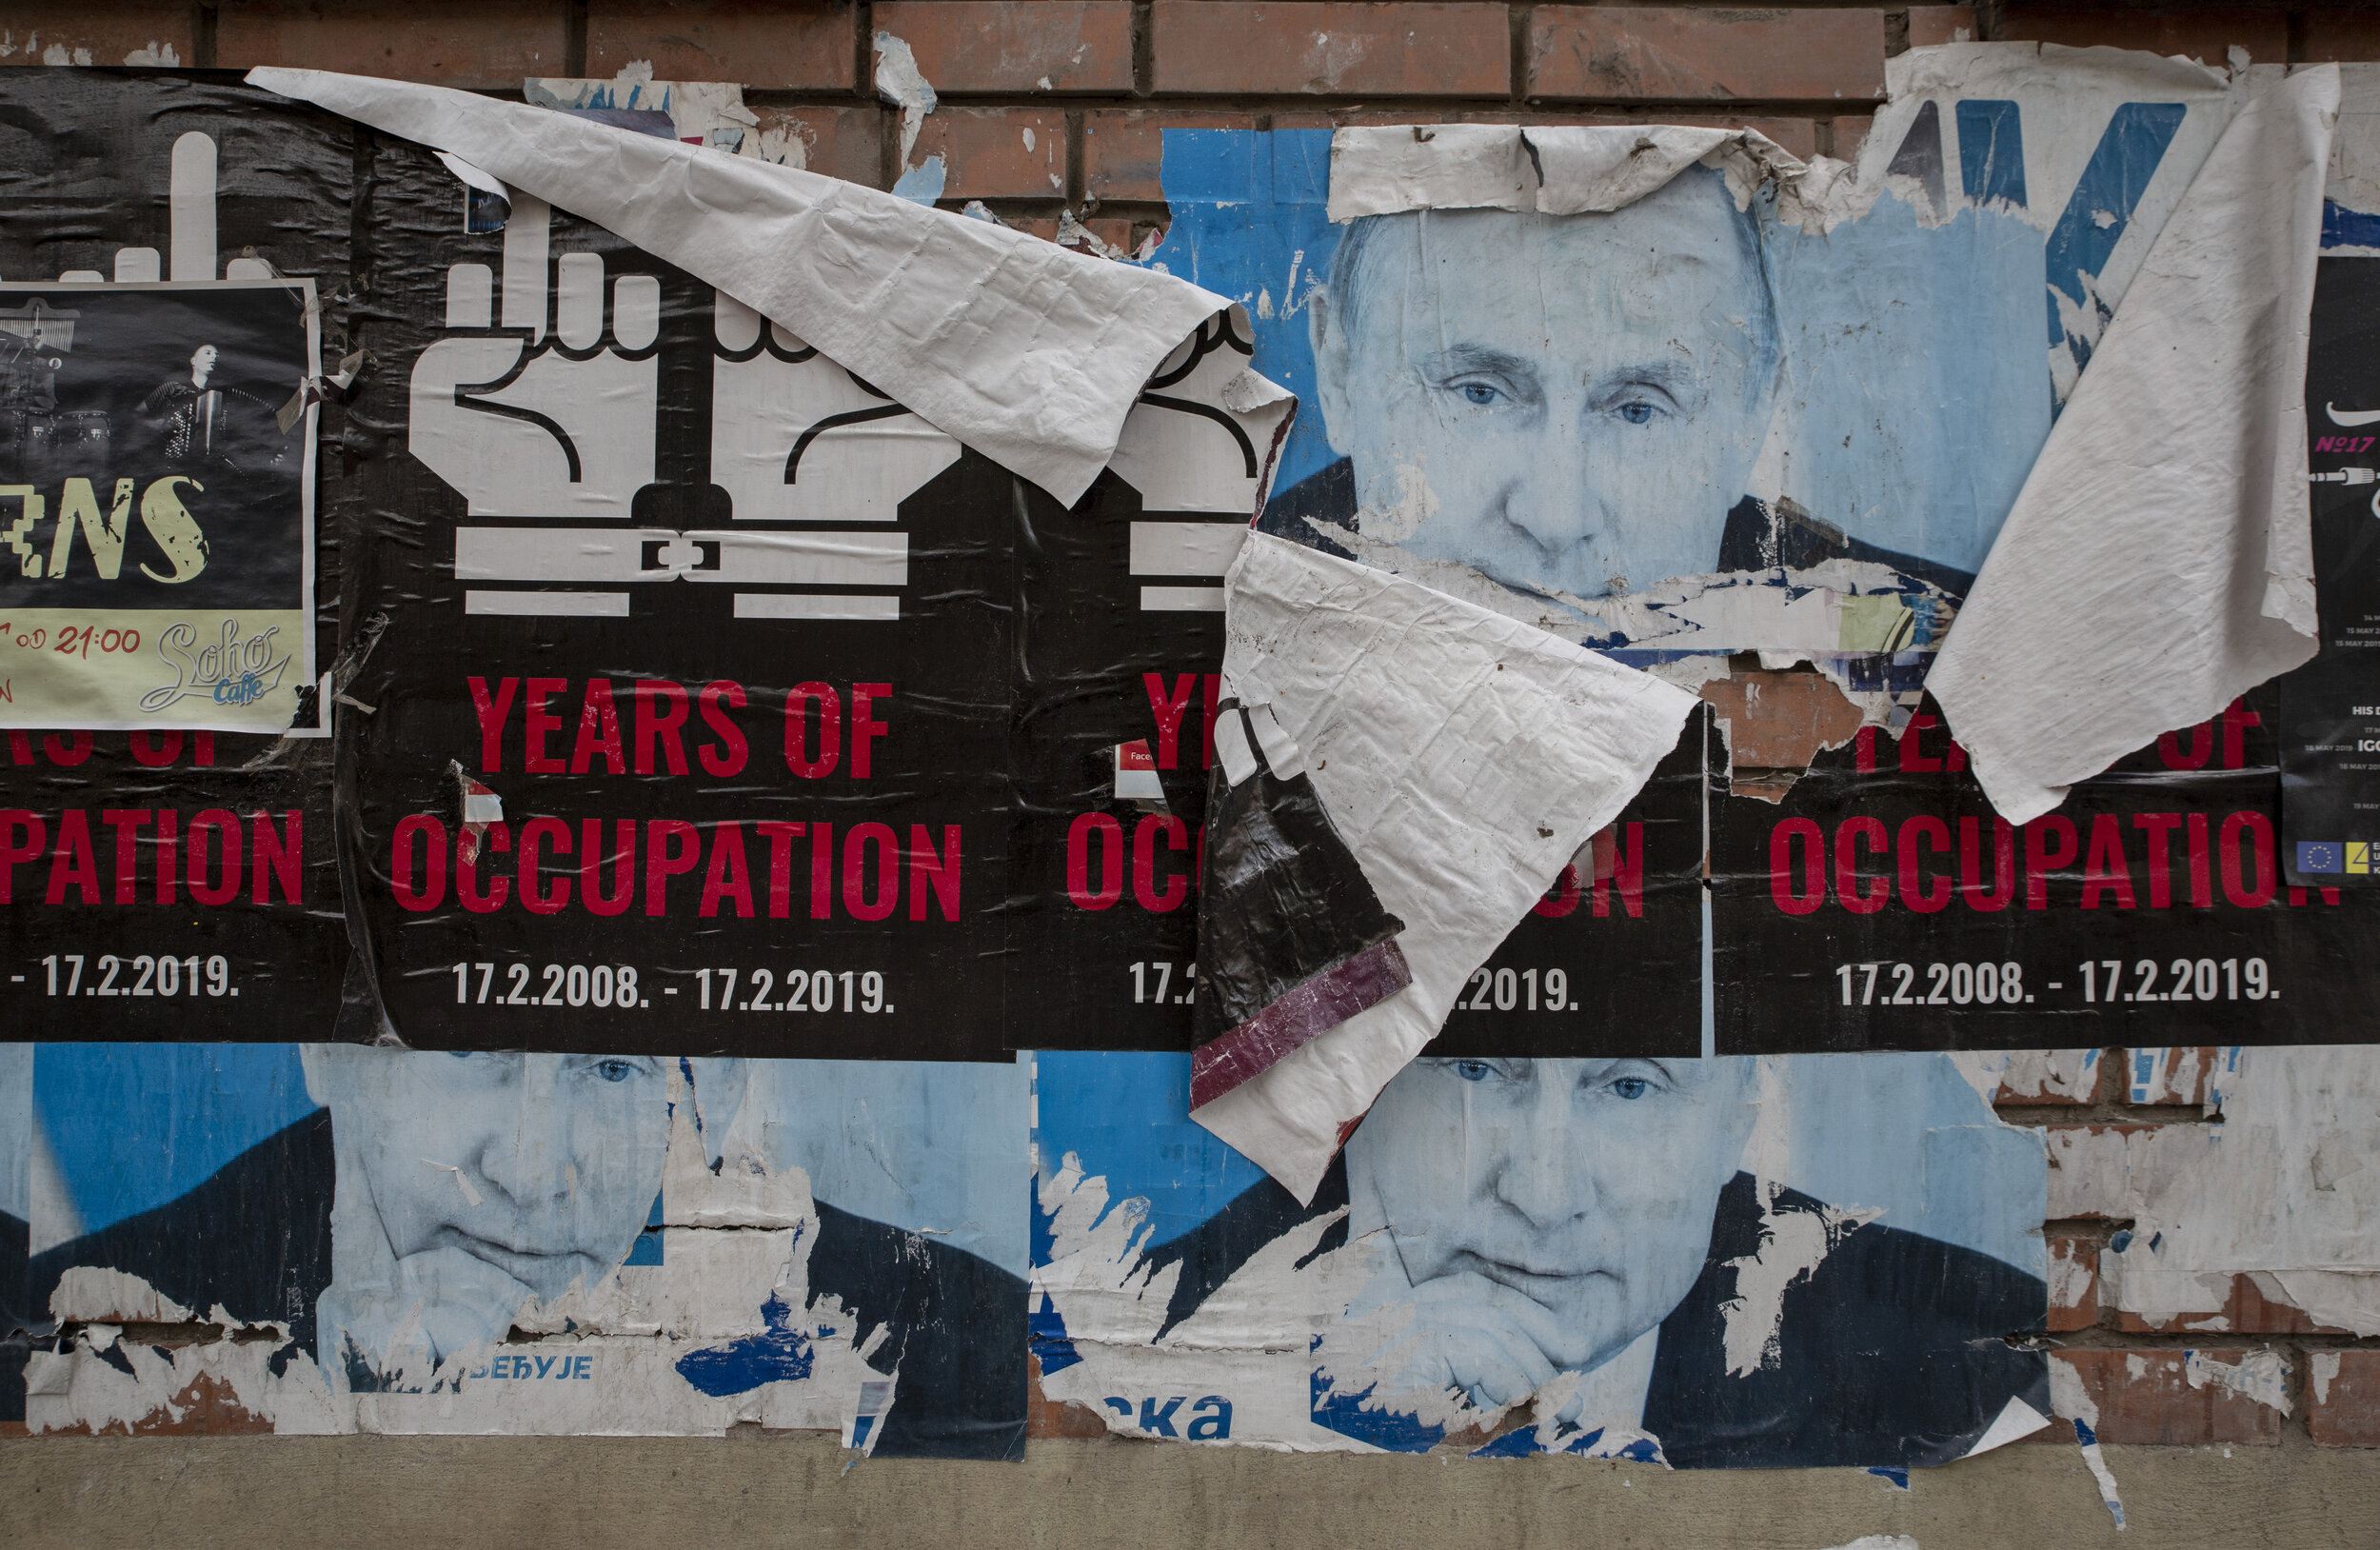  Political posters are a common sight in Mitrovica, like these claiming the occupation of Serbia since Kosovo declared independence on Feb. 17, 2008 plastered over images of Vladimir Putin. 